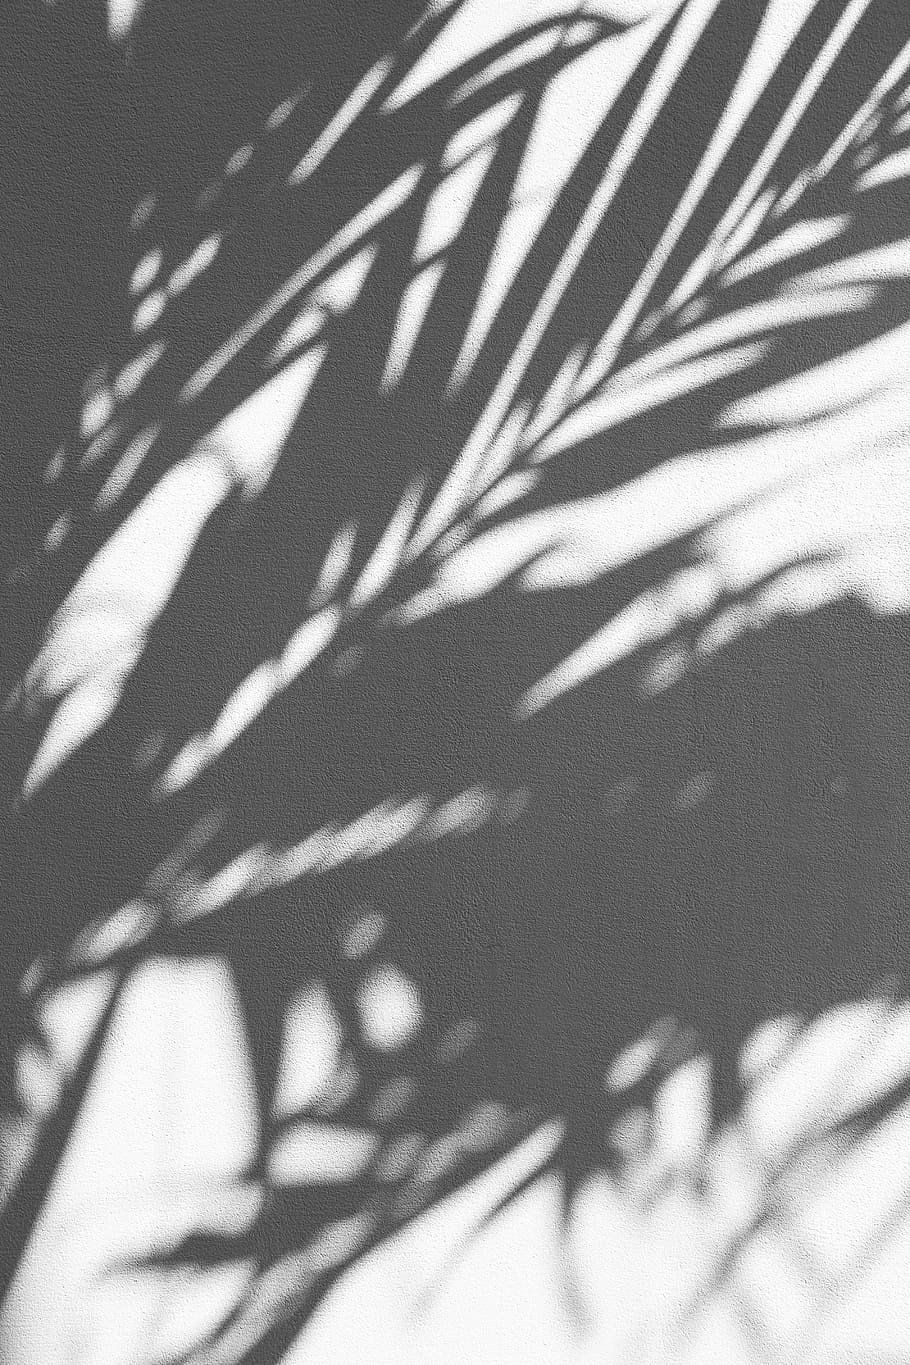 silhouette of palm tree, leaves shadow, texture, surface, minimal